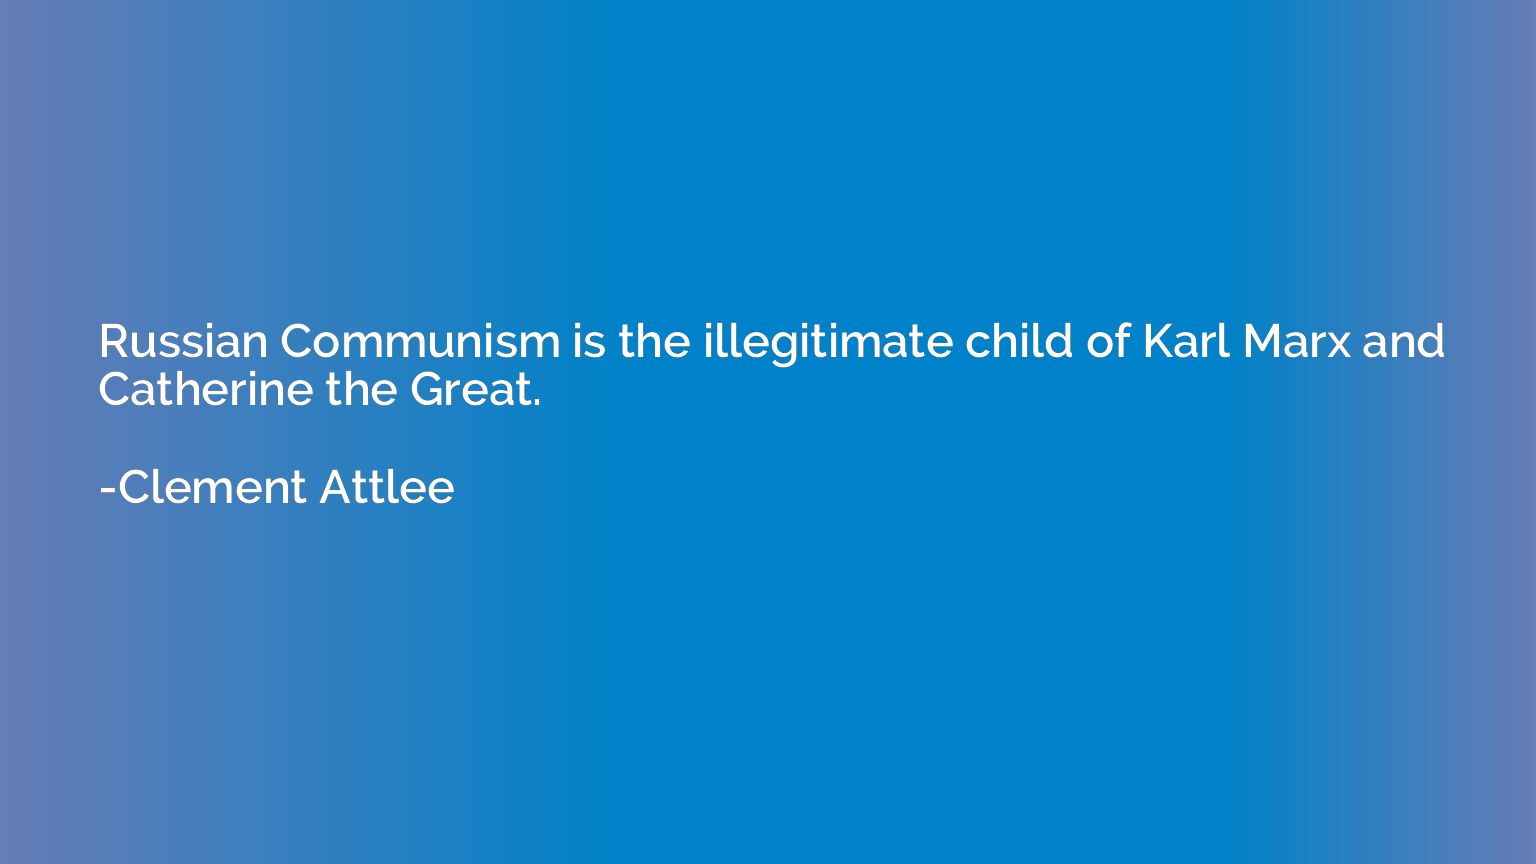 Russian Communism is the illegitimate child of Karl Marx and